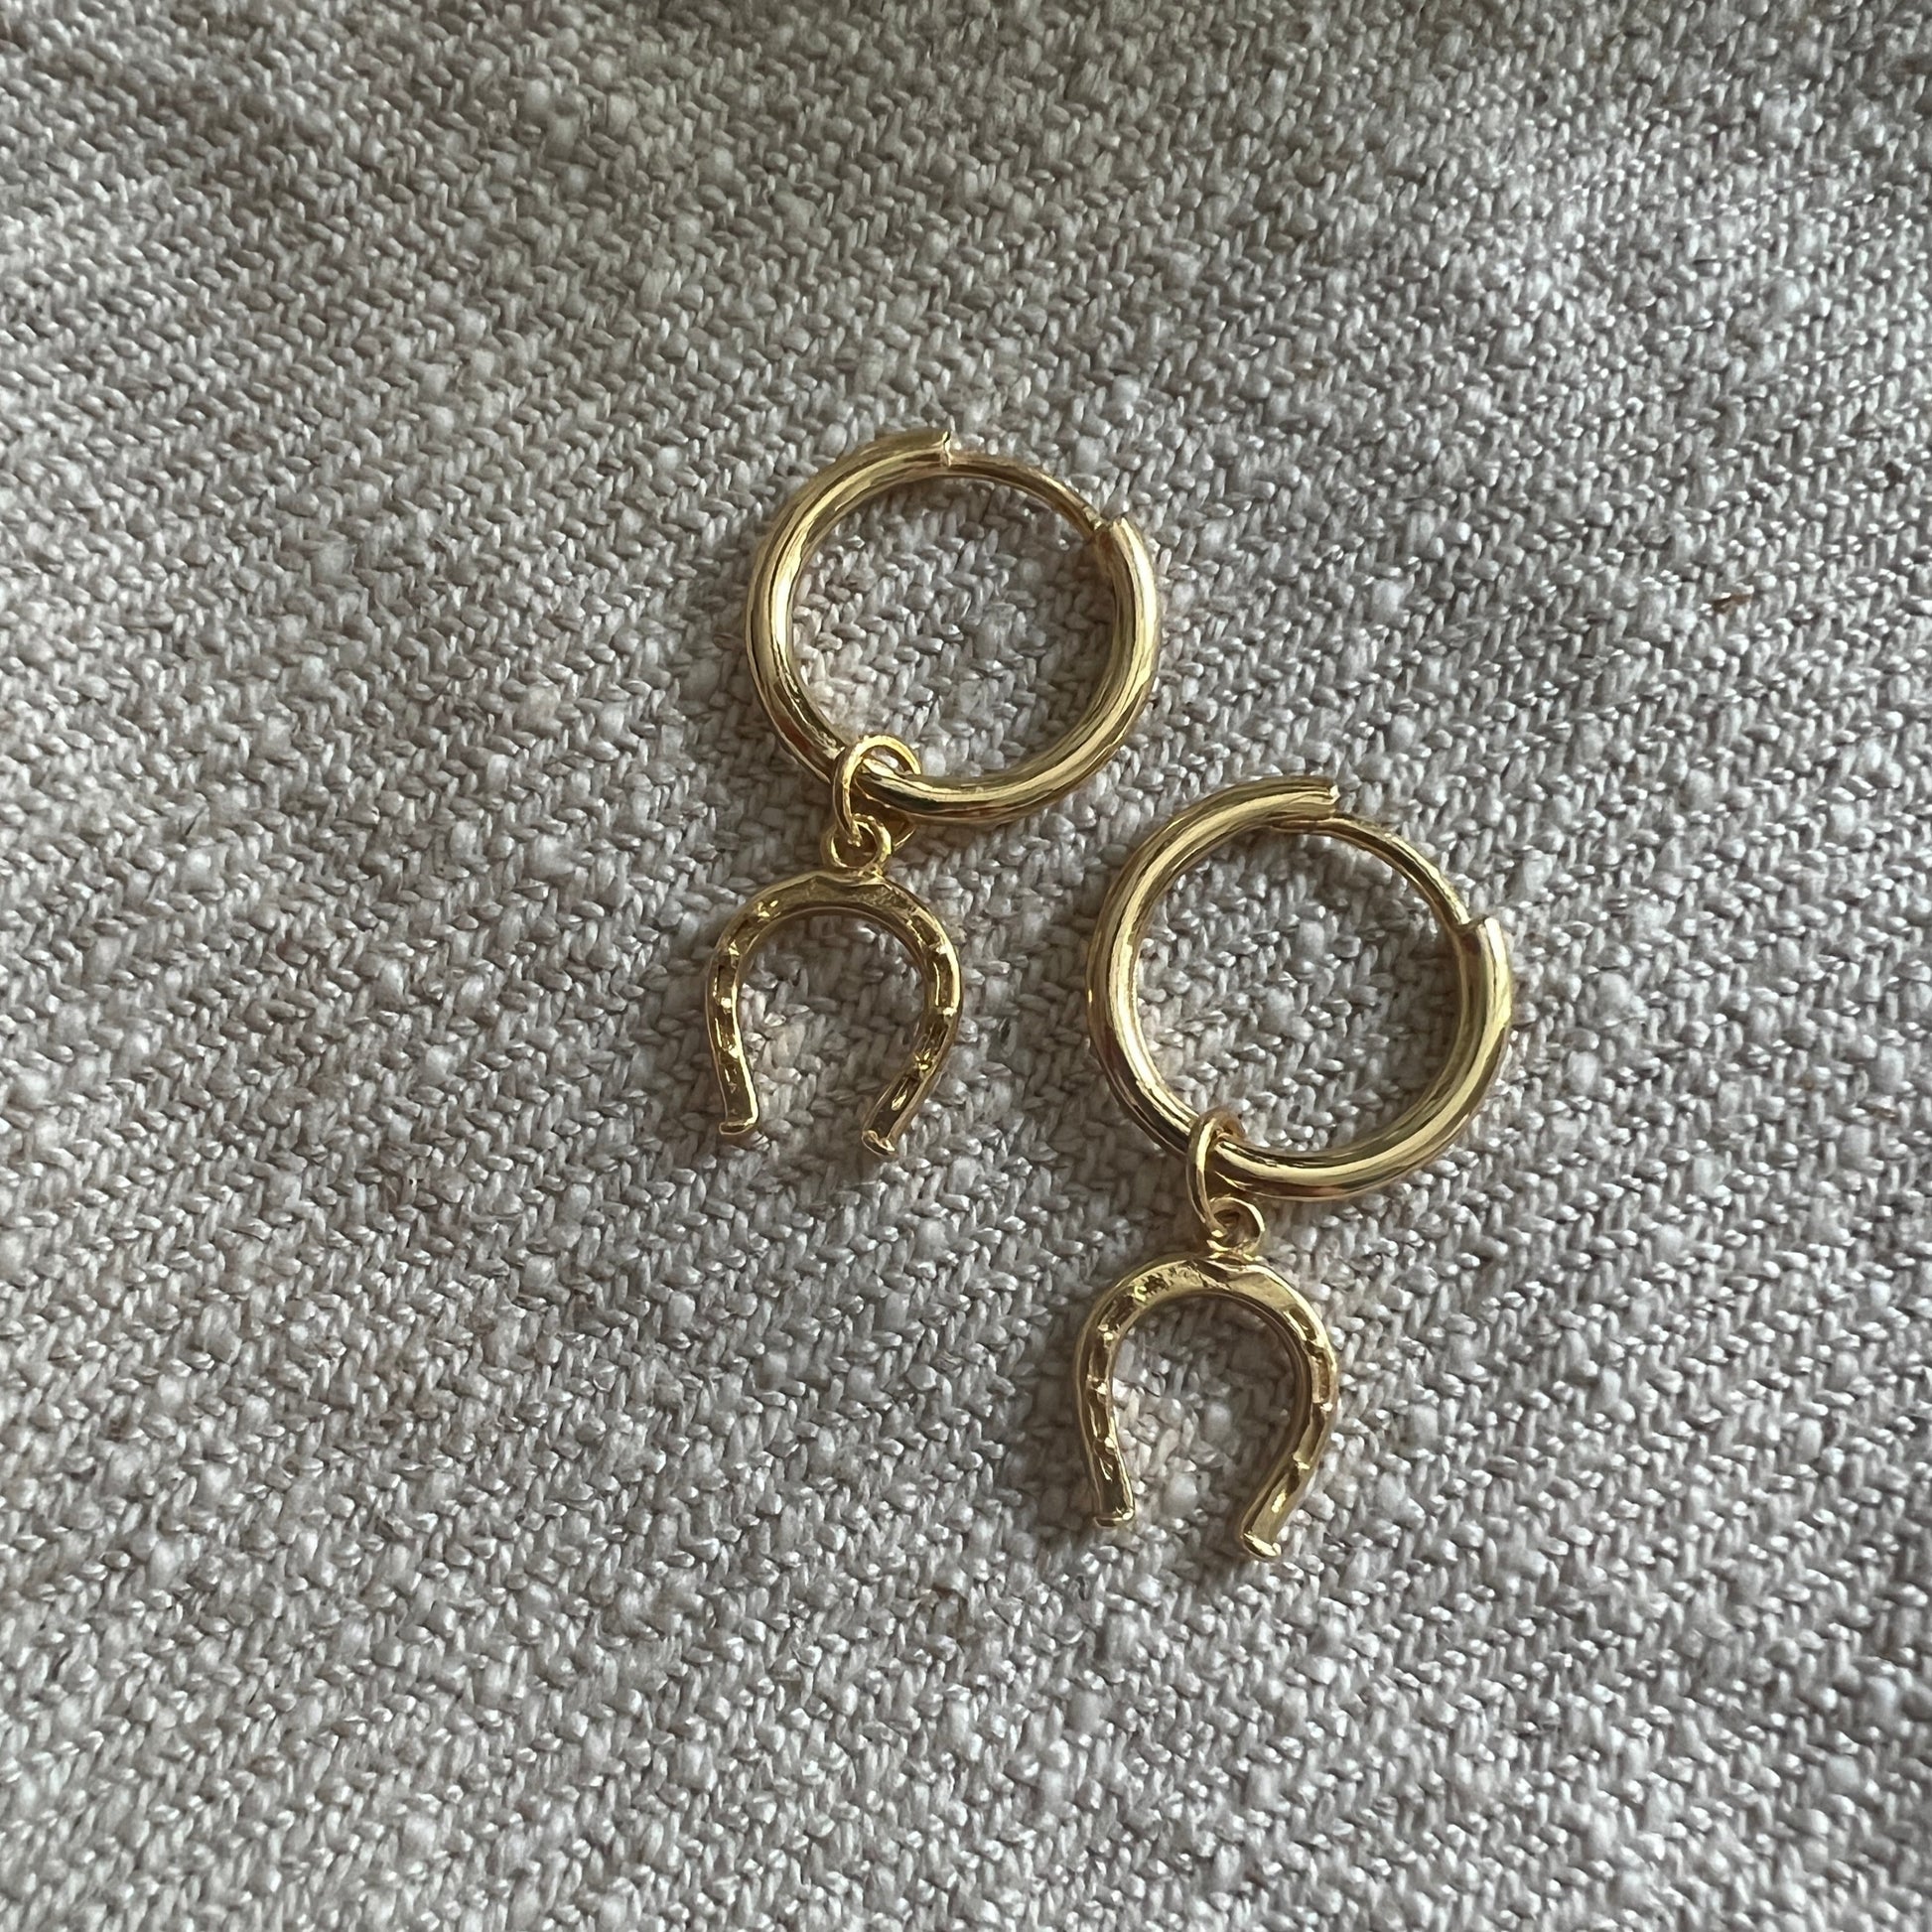 Gold hoop earrings with a horse shoe charm. The horse shoe faces downwards to represent good luck. The photo is on a plain cream linen rough texture. 